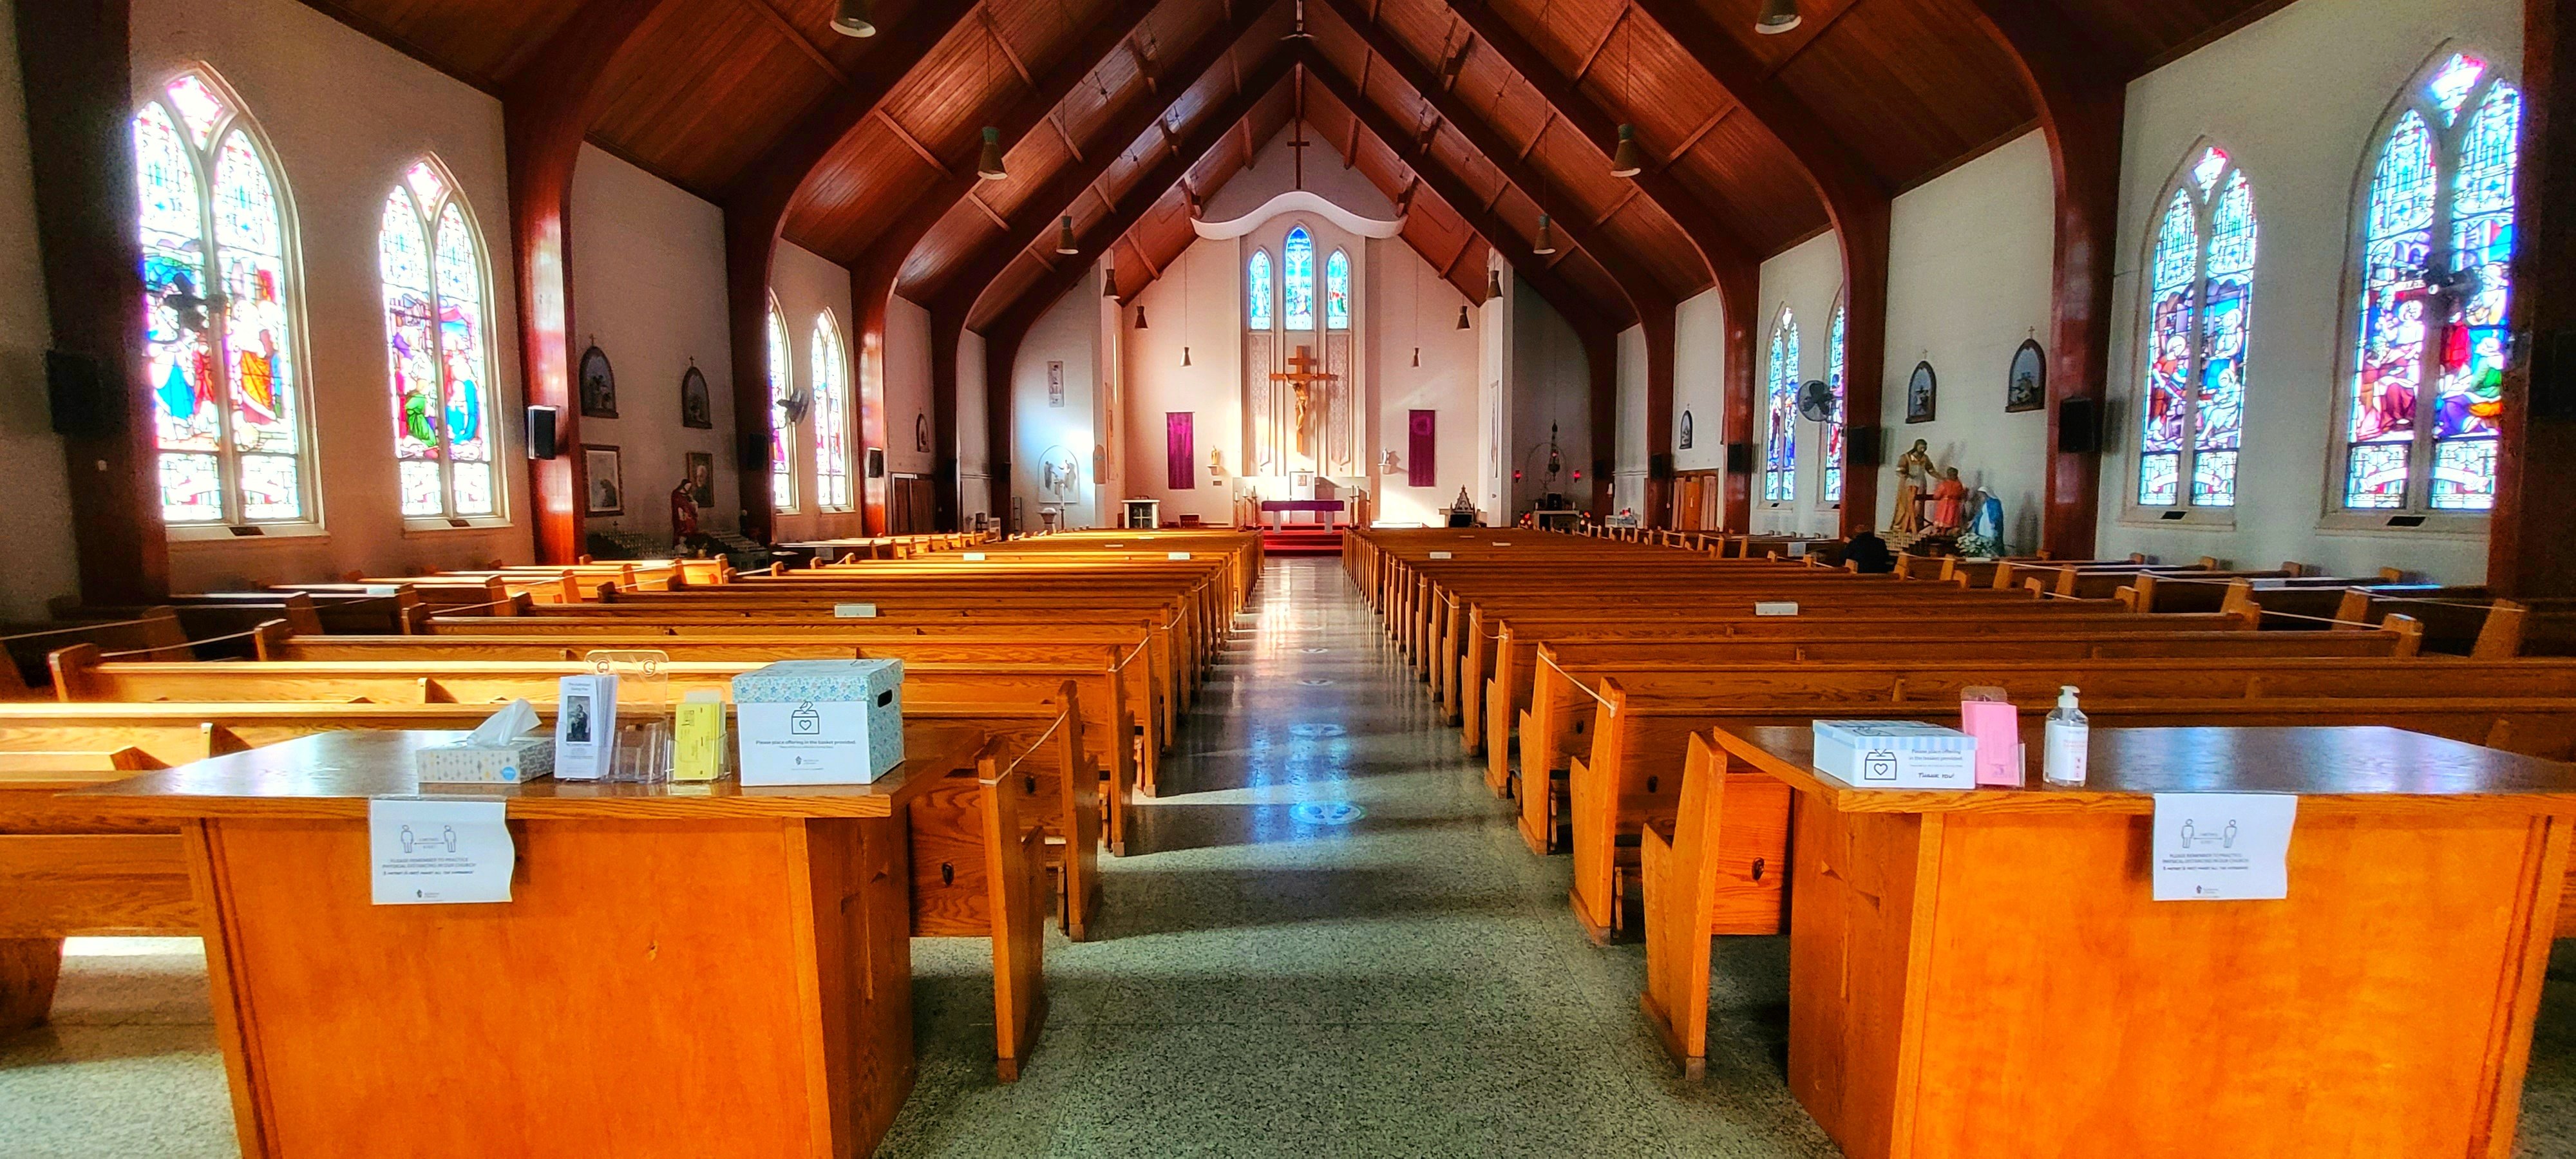 inside pic of the church